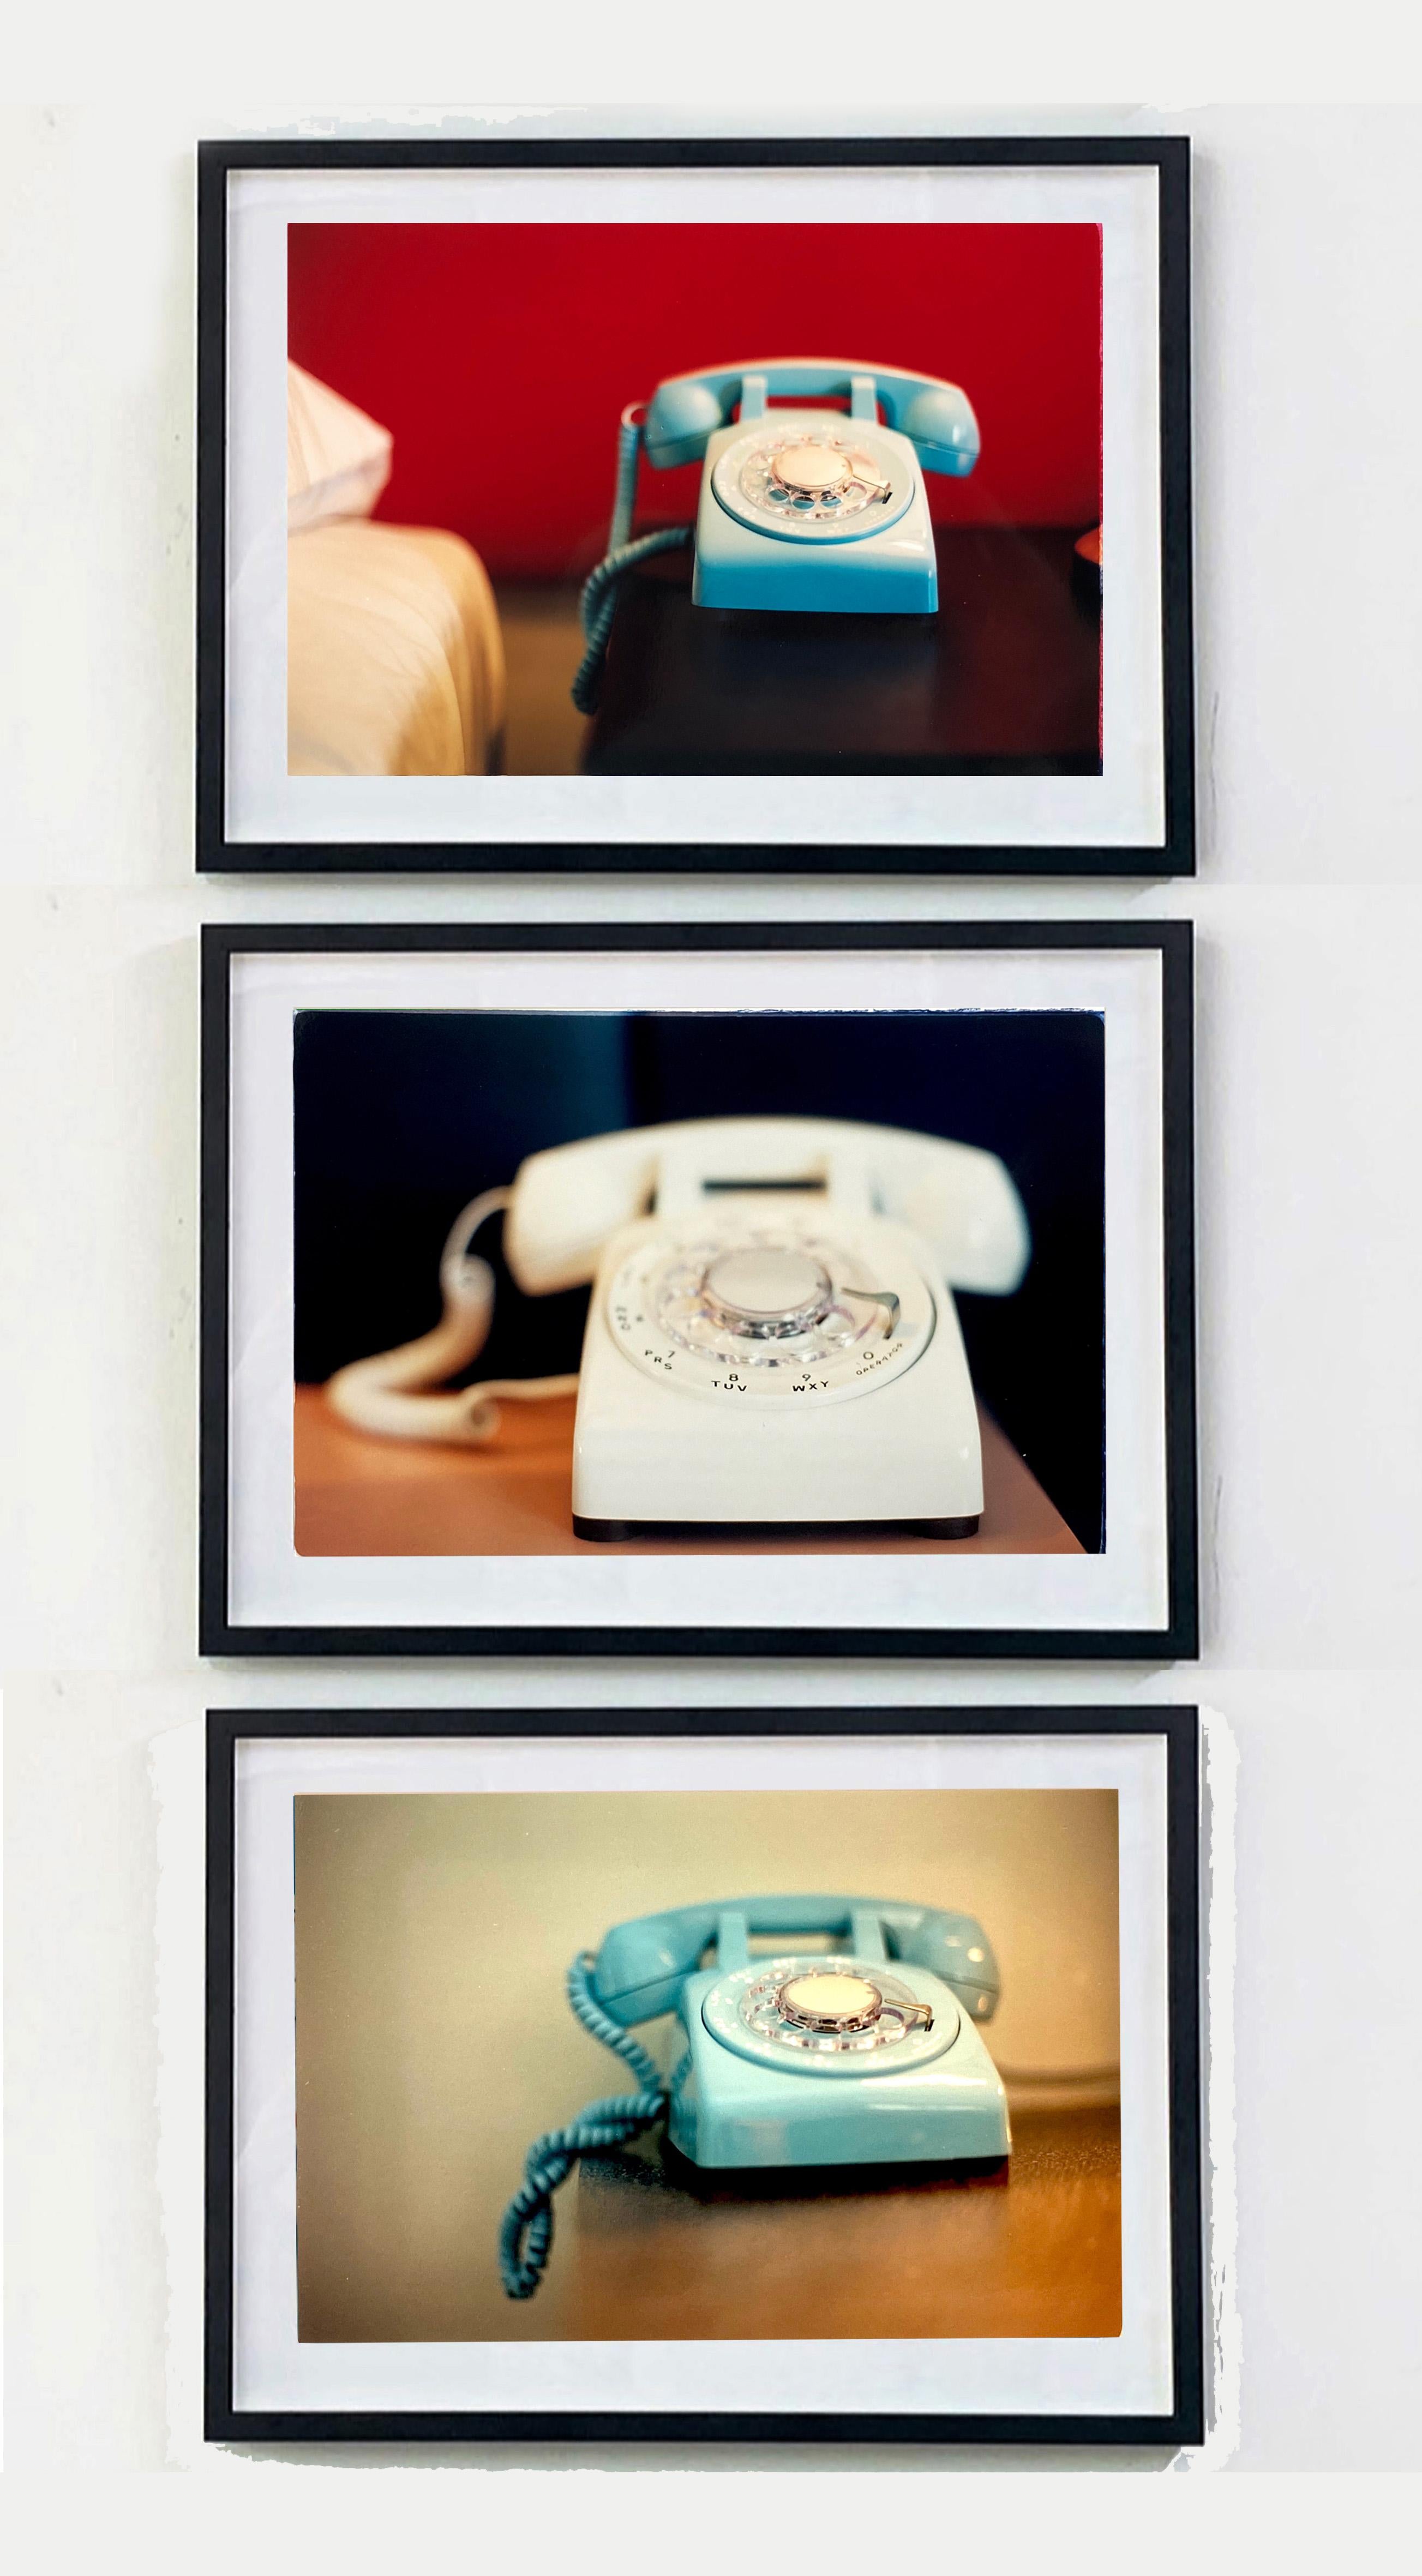 'Telephone V' part of Richard Heeps 'Dream in Colour' Series. 
This cool Palm Springs interior photography combines a softened monochrome palette and a mid-century modern nostalgic vibe.

This artwork is a limited edition of 25.
Gloss photographic